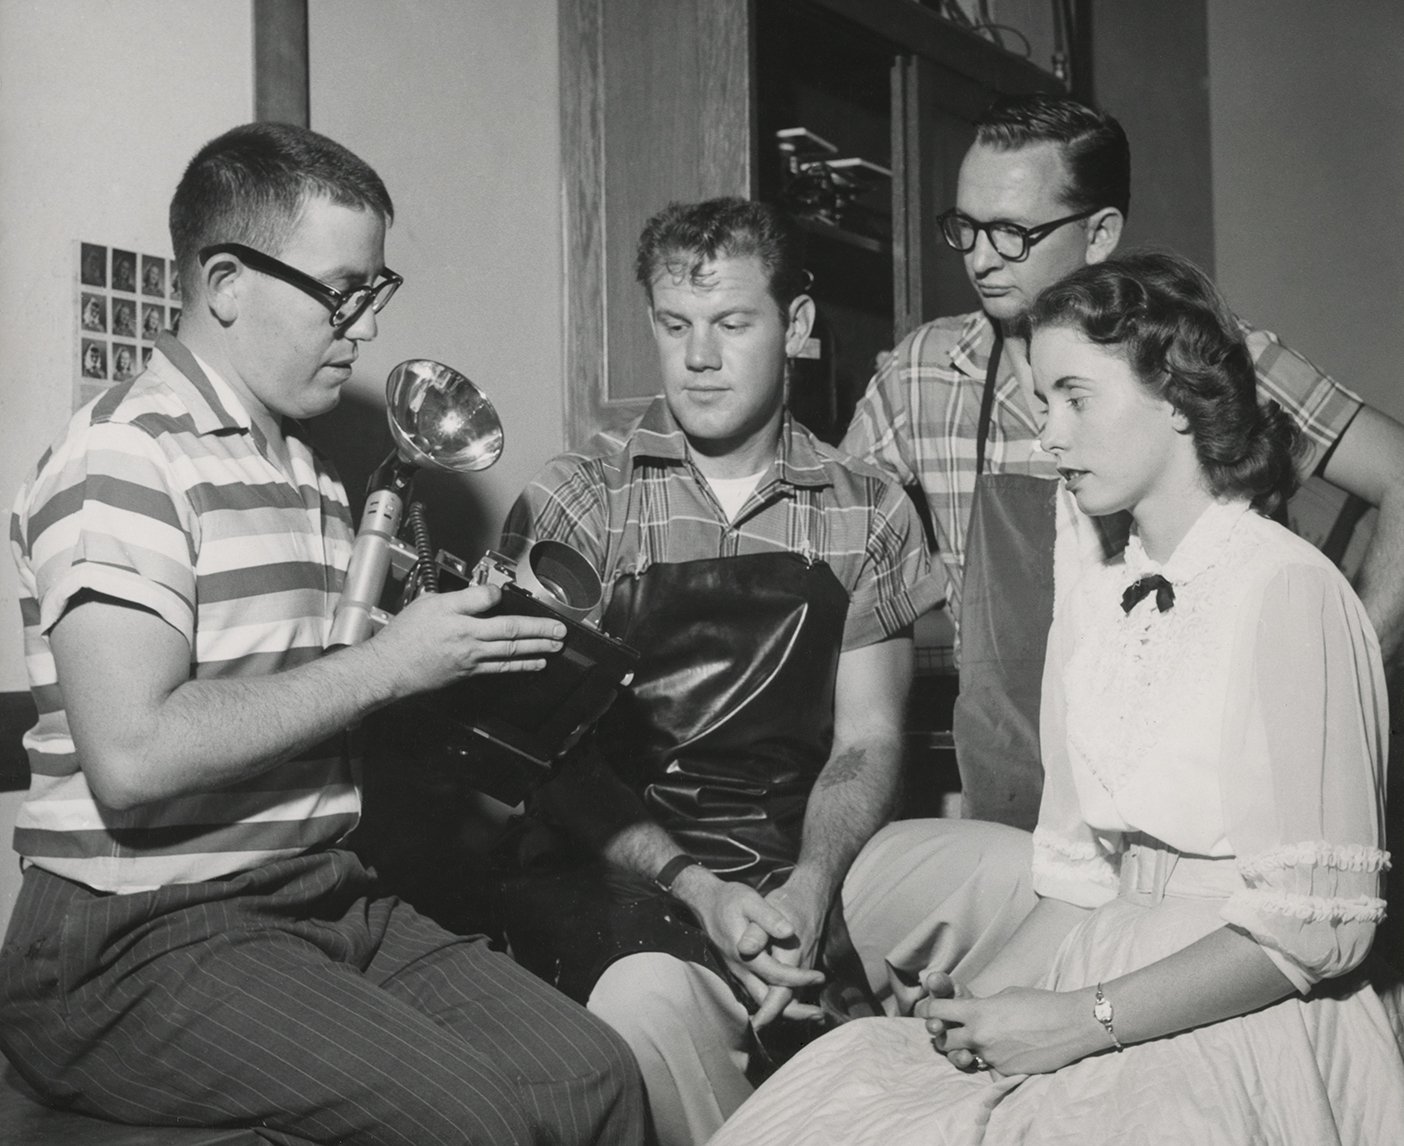 Three students gather around an instructor, who teaches the students how to use a camera and flash in 1957.